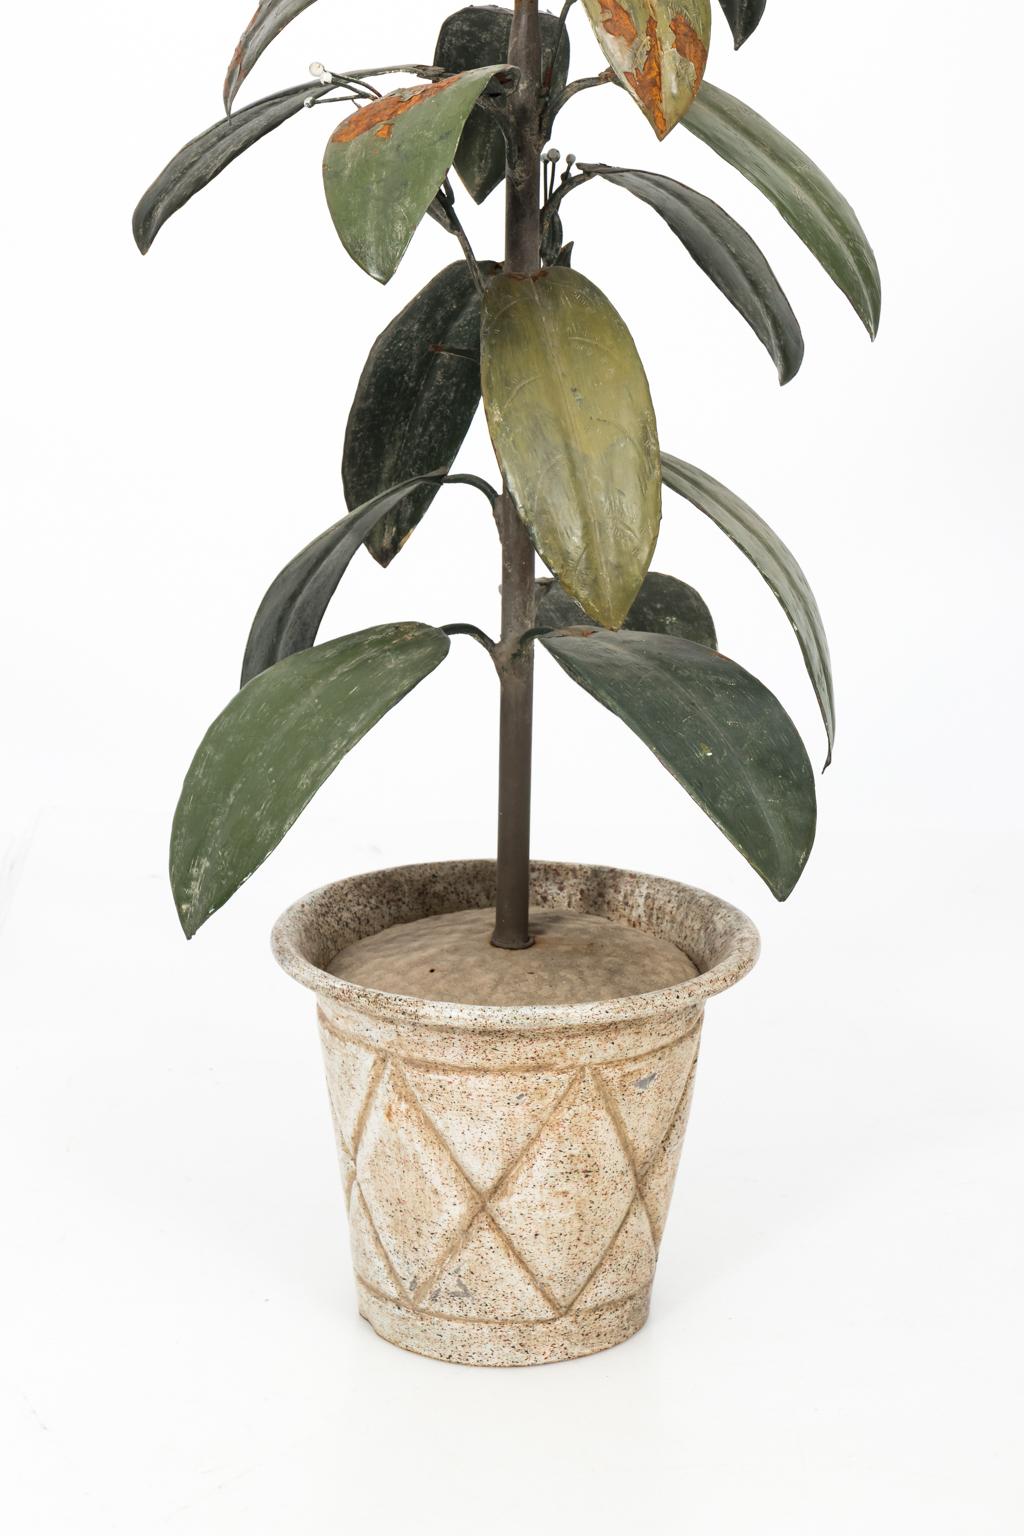 Painted tole rubber trees front France in white pot. There is some oxidation on the leaves, circa 1910.